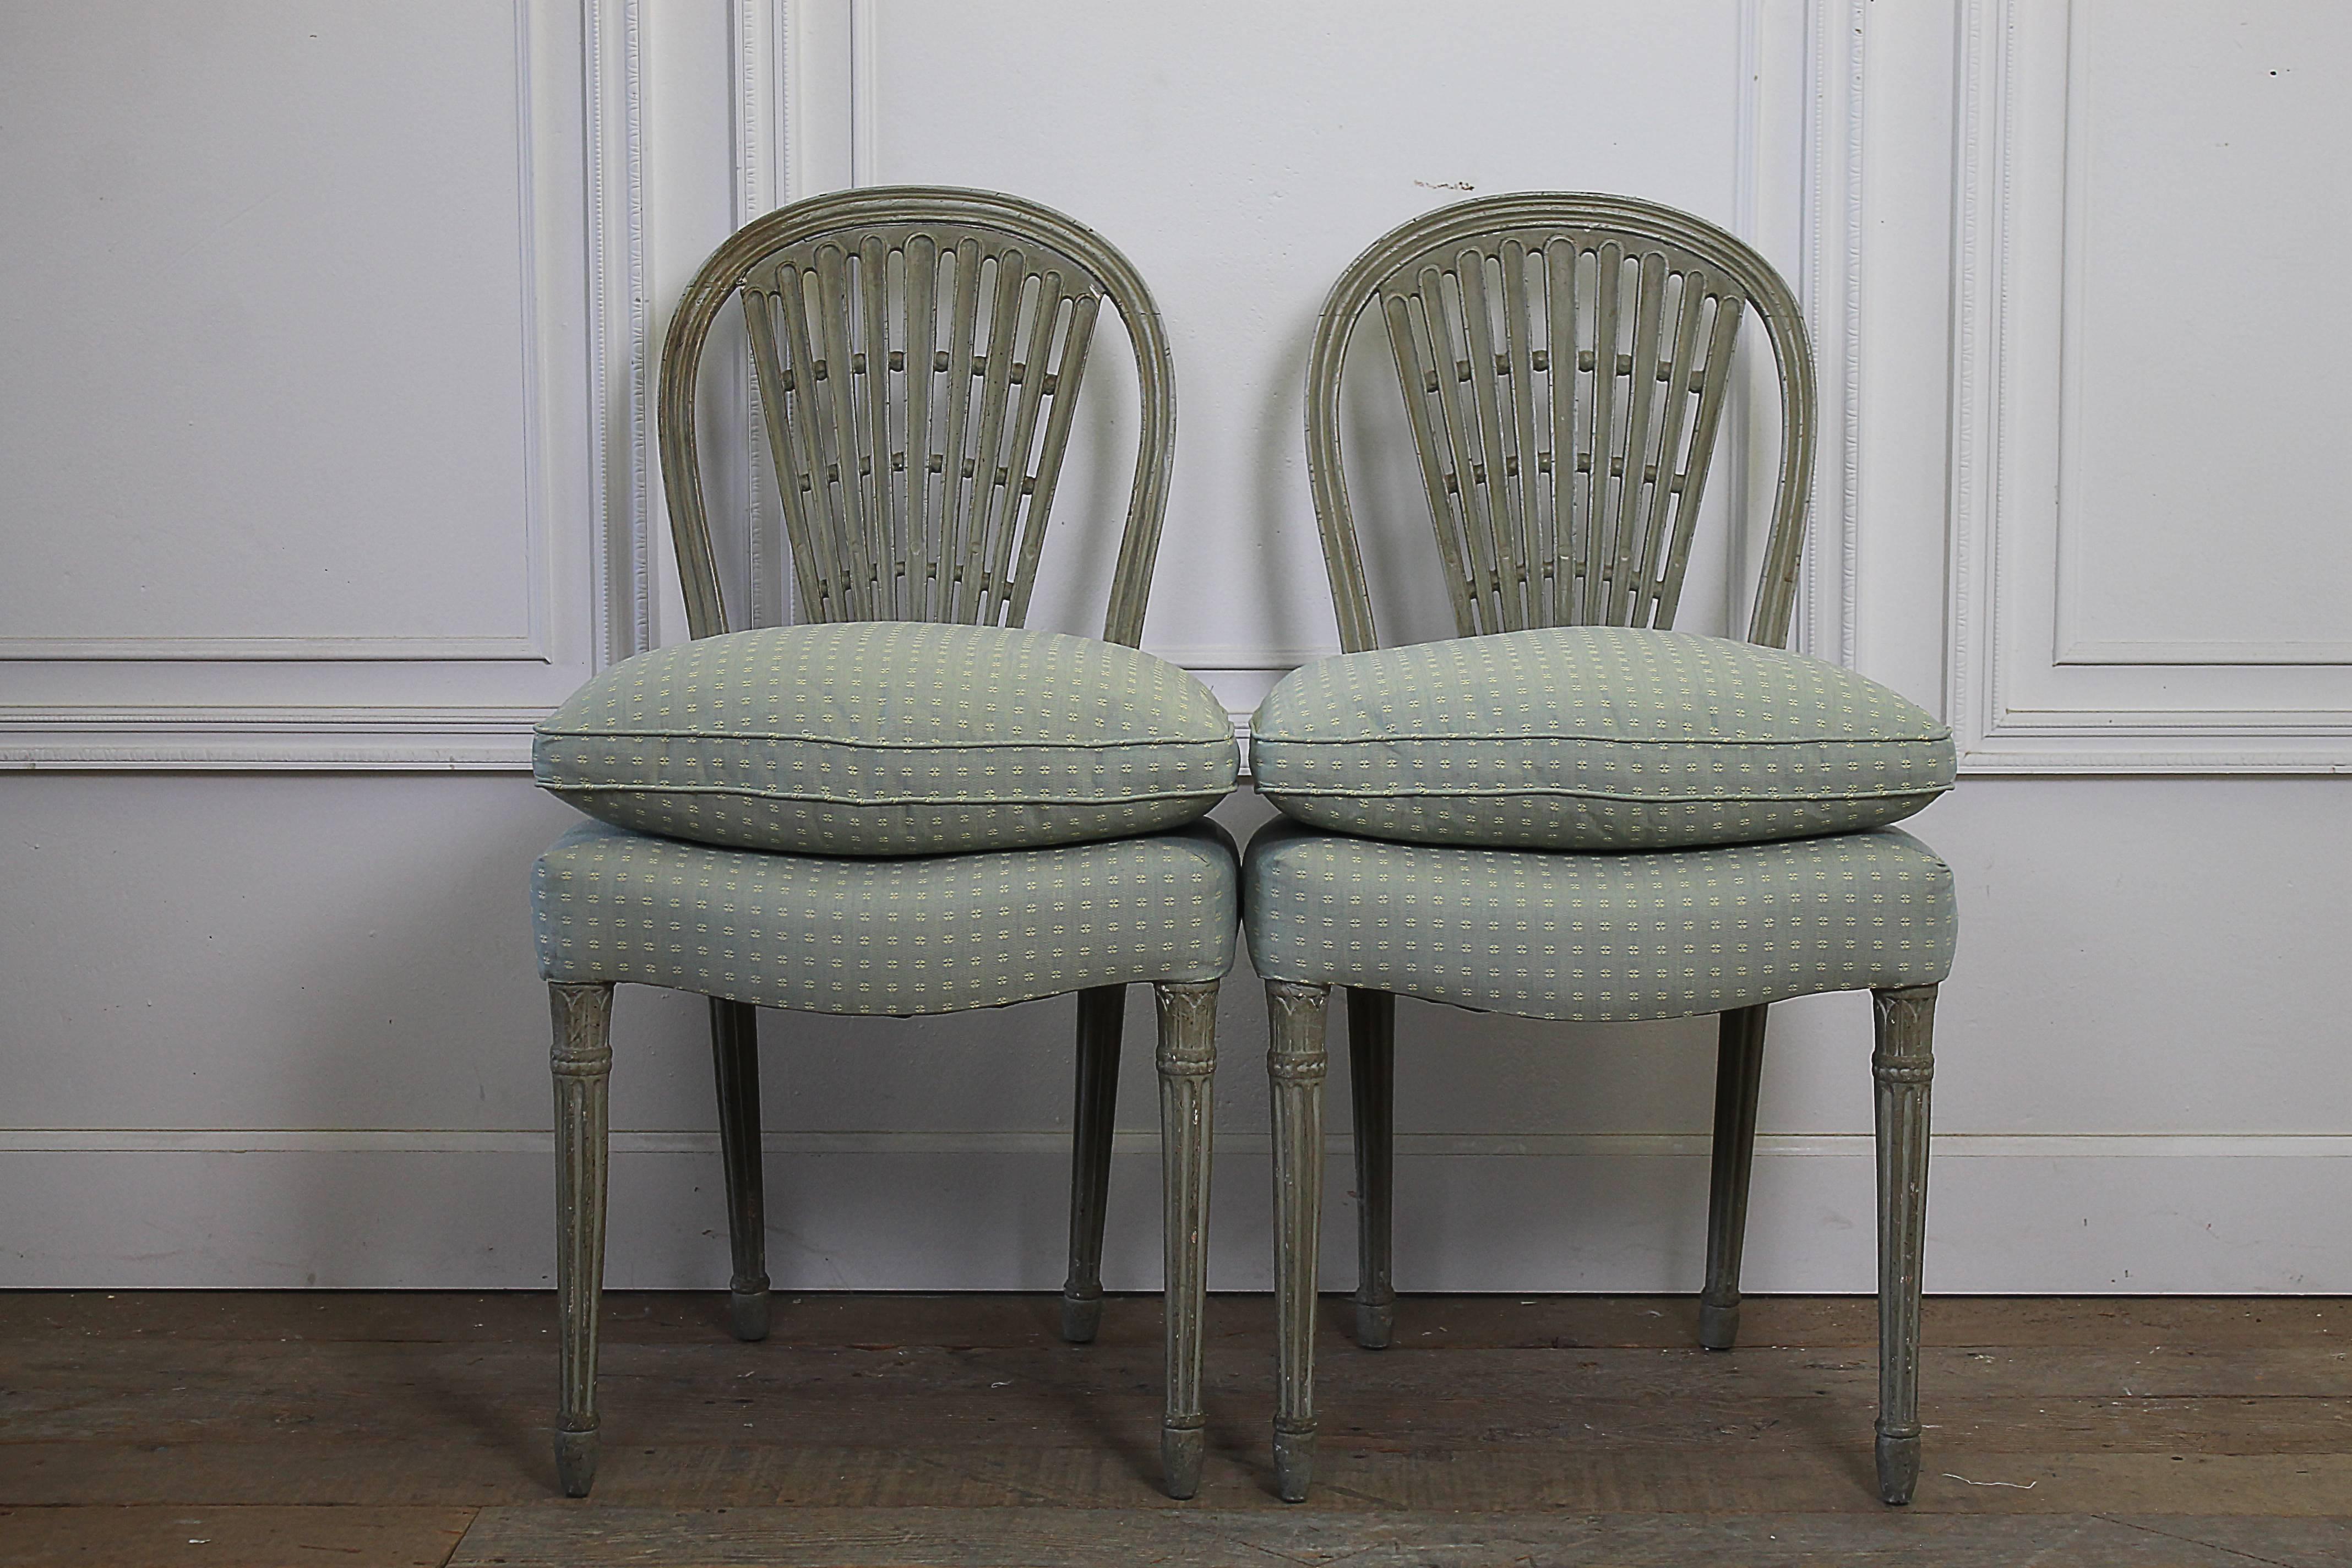 Early 19th Century Painted Upholstered Wheatsheaf Style Gustavian Dining Chairs
These are a set of 2 side chairs and 2 arm chairs, painted in a Gustavian Grey color, with subtle distressing.  Upholstery is as found, looks newer and very clean, seats